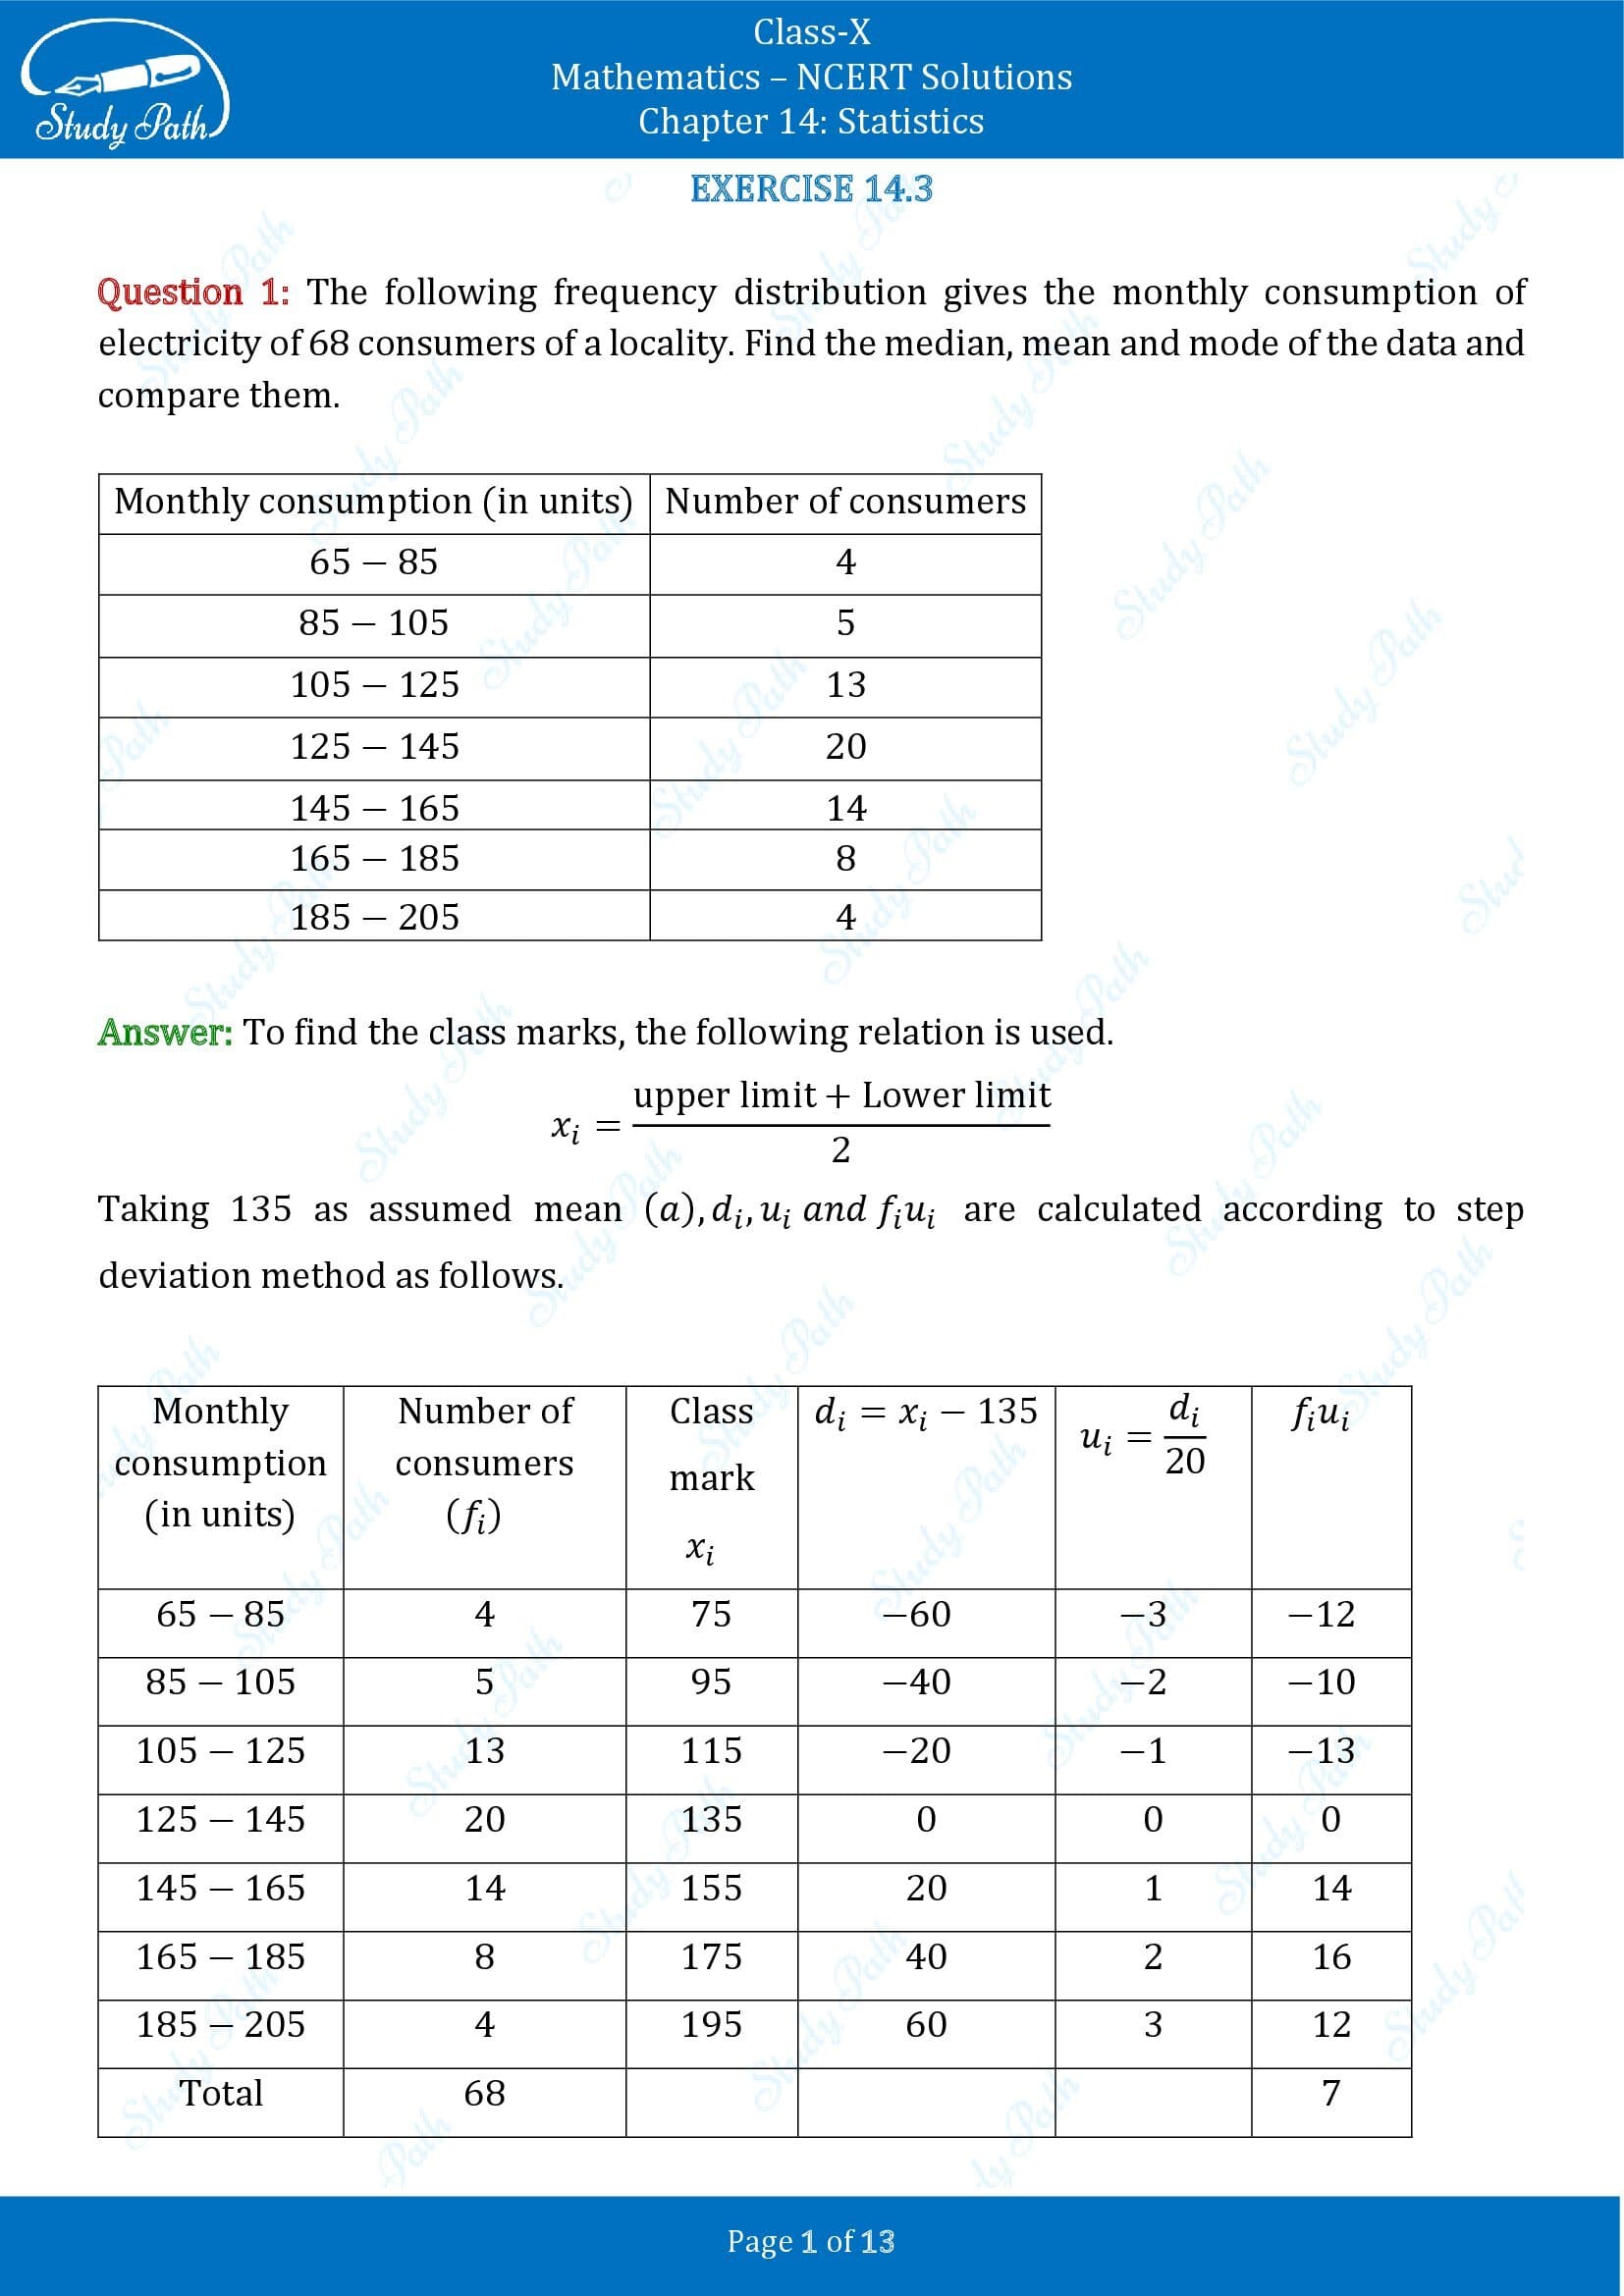 NCERT Solutions for Class 10 Maths Chapter 14 Statistics Exercise 14.3 00001